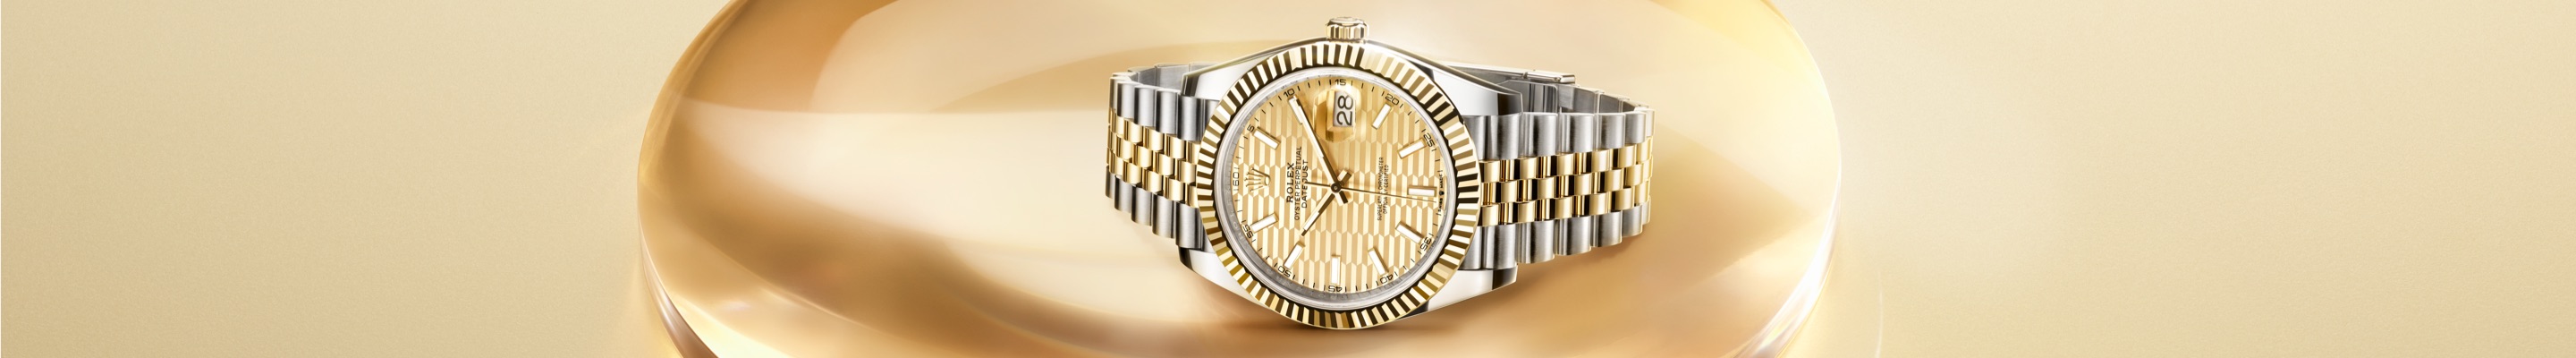 Two-tone Rolex Datejust on gold setting banner